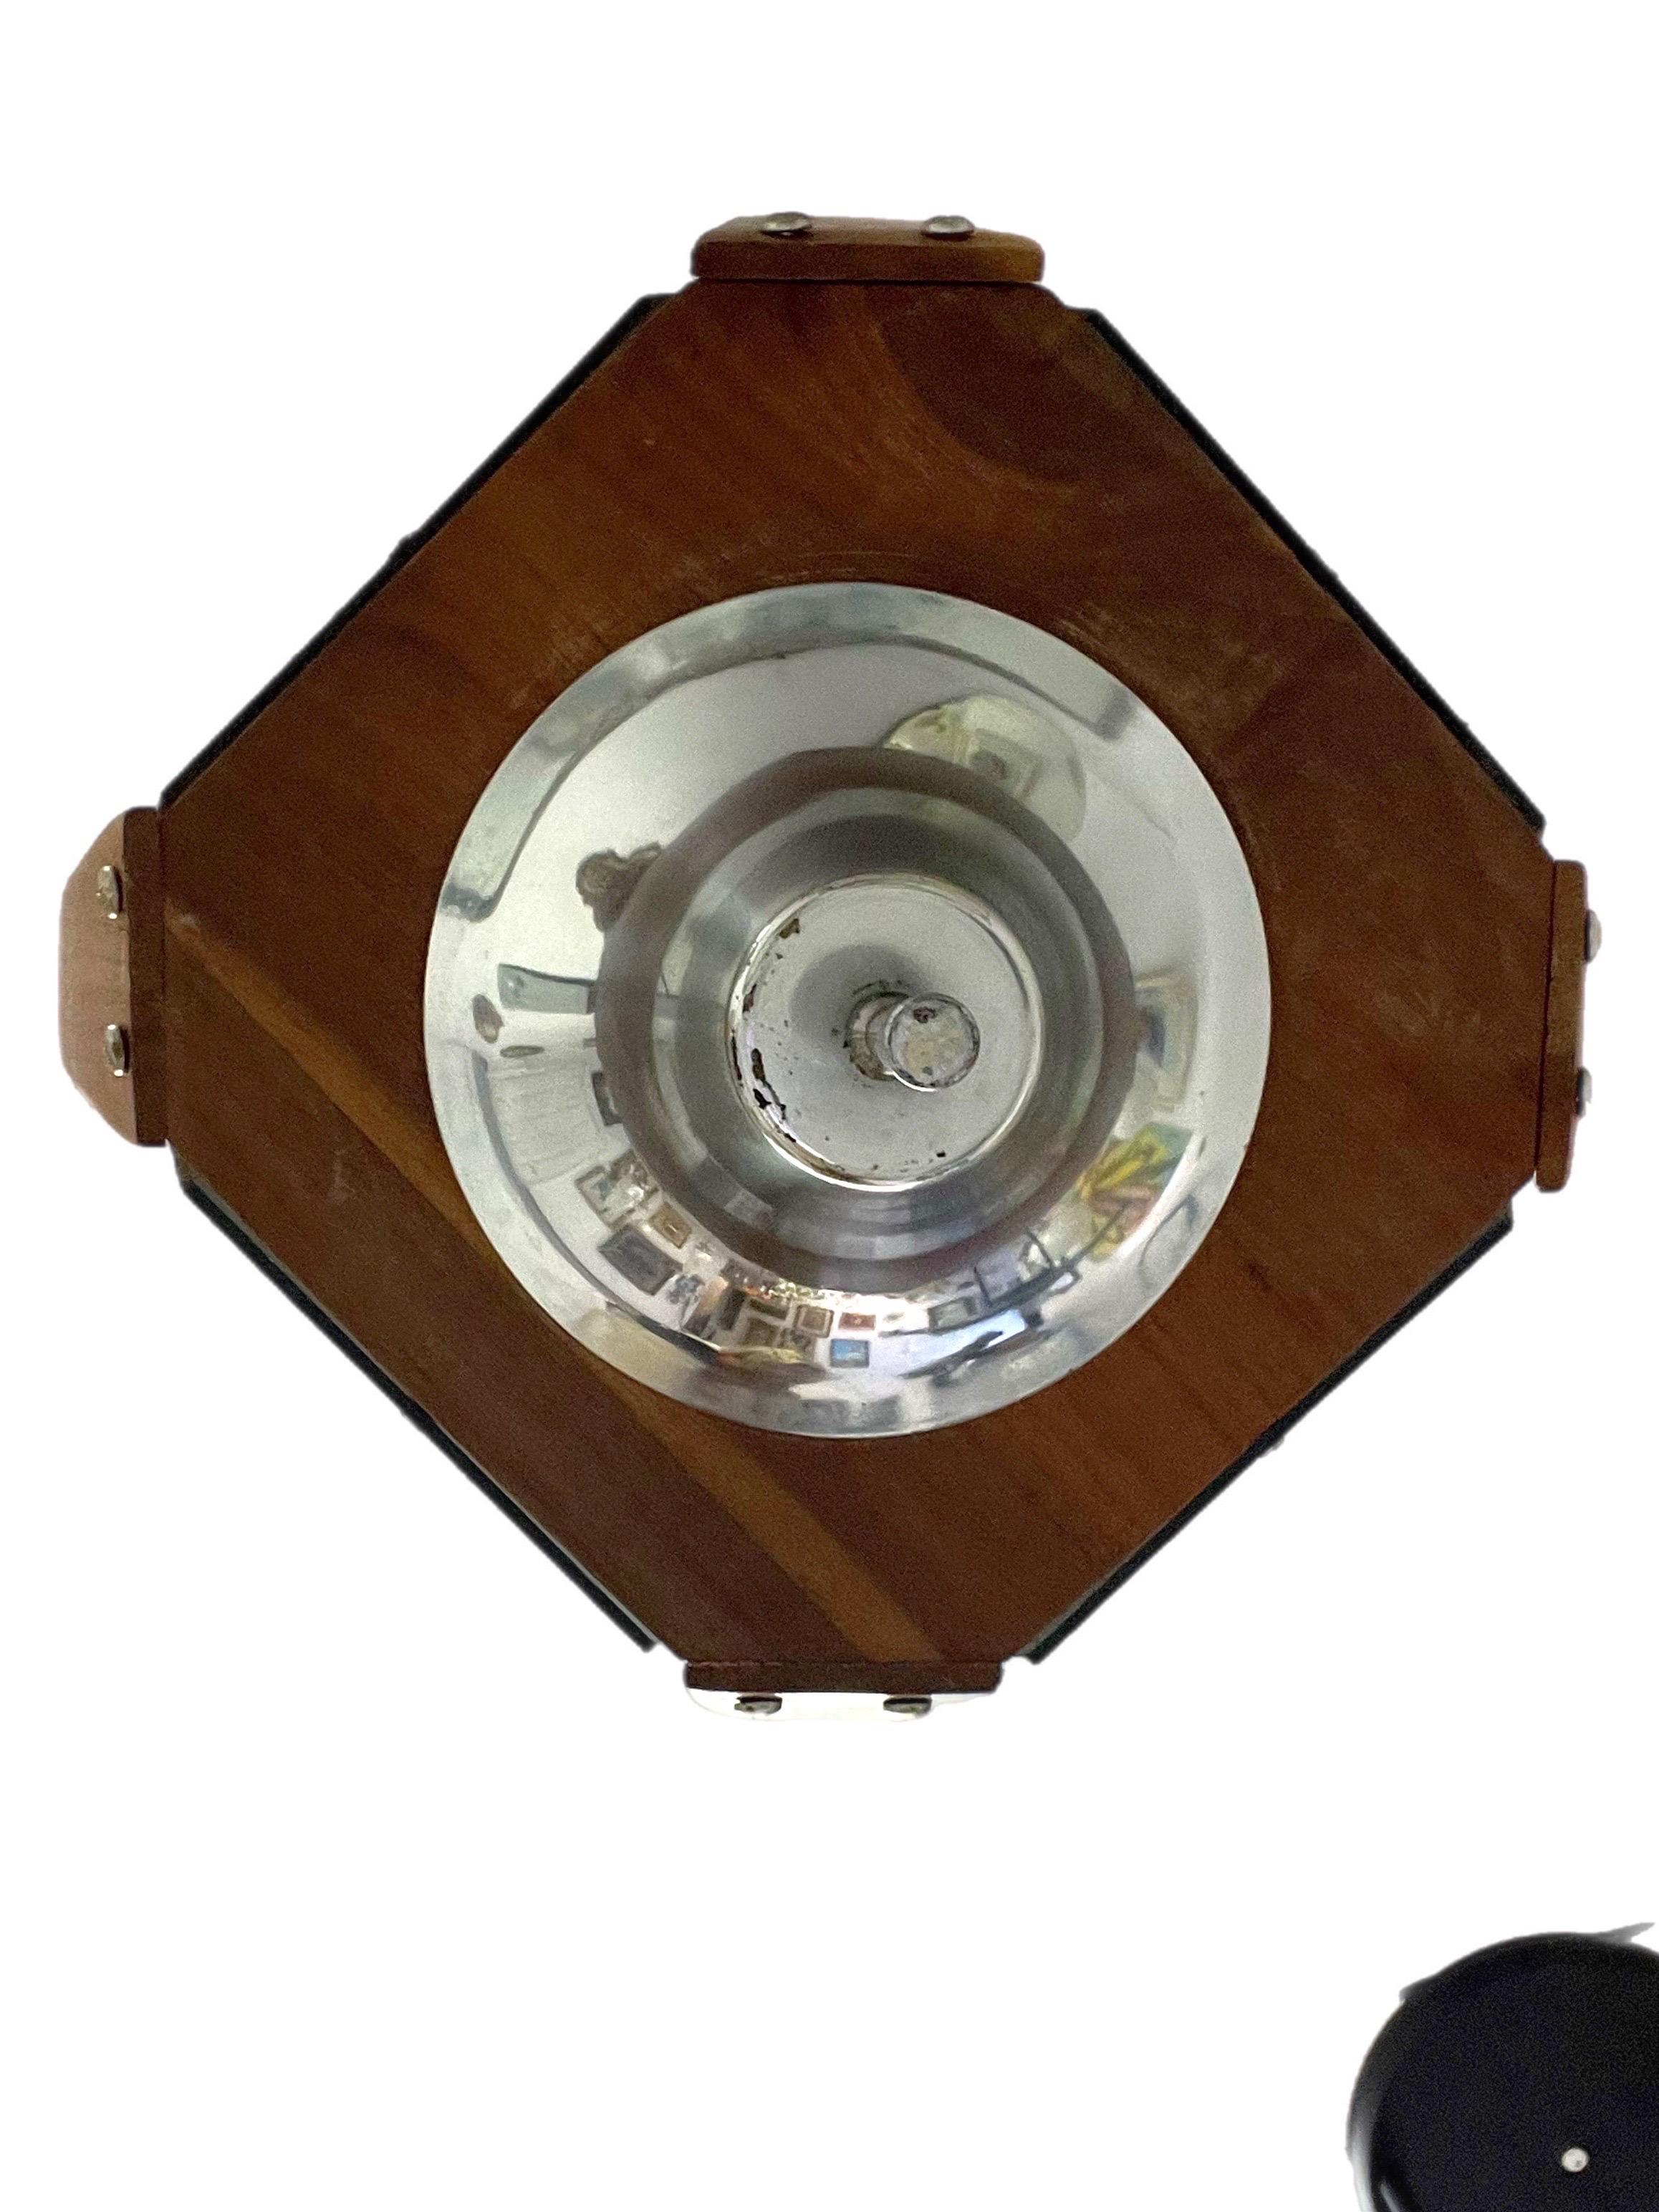 This cool overhead lamp features smoked acrylic panels surrounding a chrome frame with bent wood walnut corners which hangs from a corded chain.  The interior features 4 candle form interior lights.  The measurements are from the finial to the